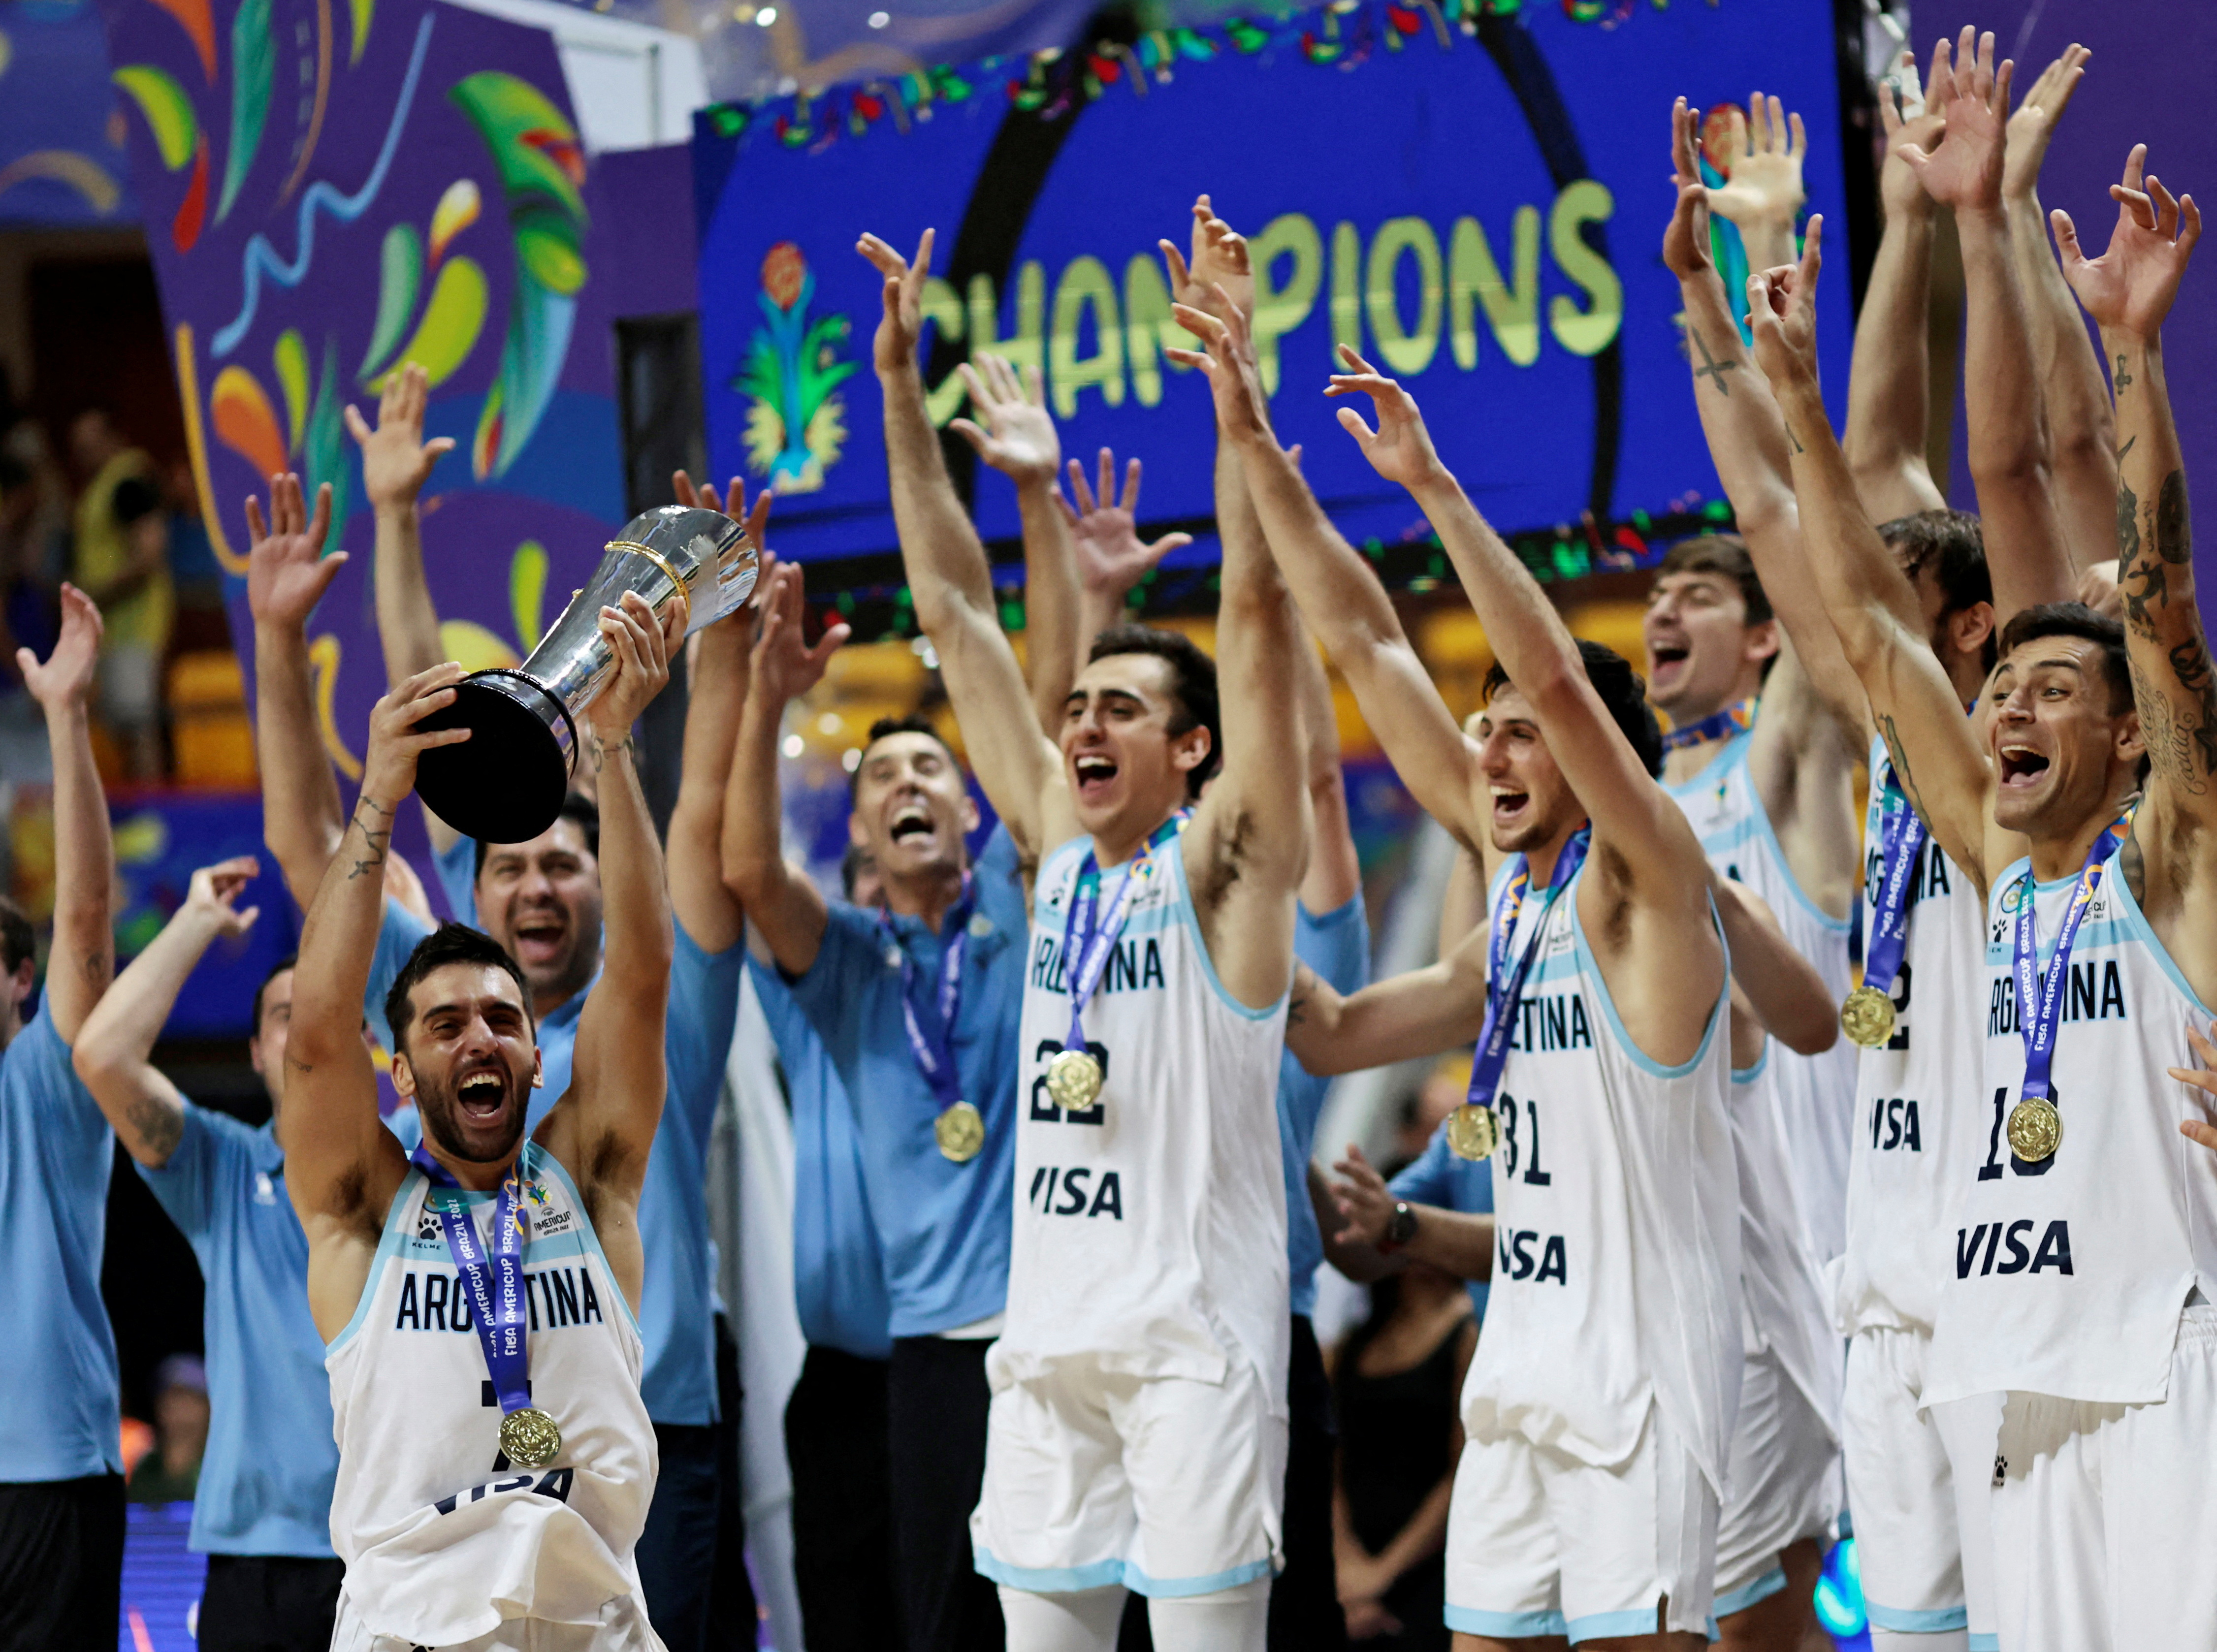 Campazzo, Vaulet, Bolmaro and Delfino, in the front row of the celebrations (REUTERS / Ueslei Marcelino)